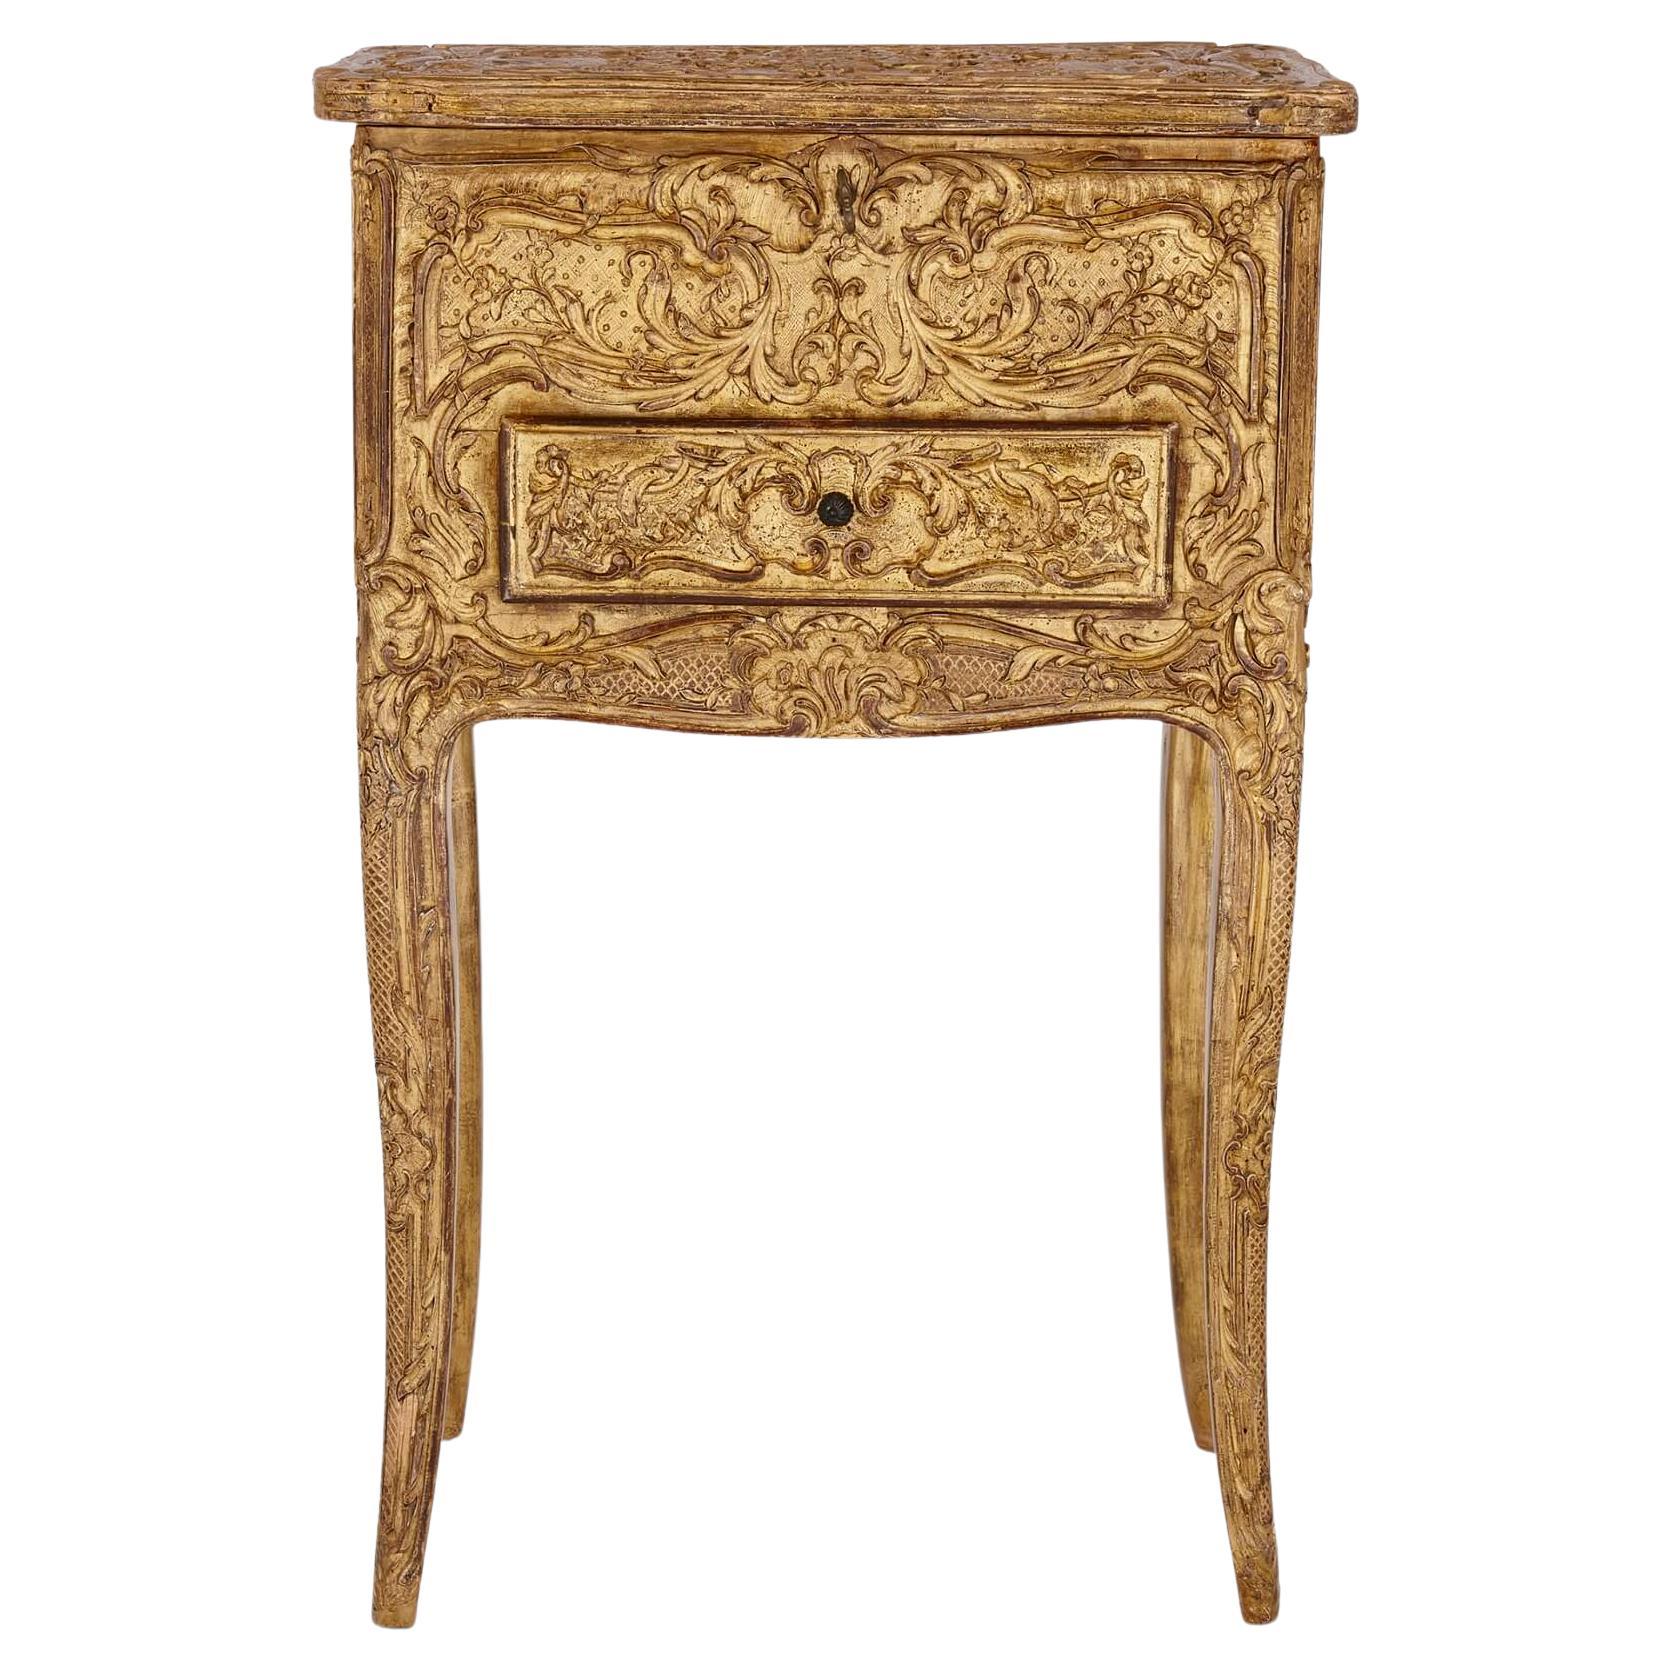 French Régence Period Carved Giltwood Table with Mirror, Early 18th Century